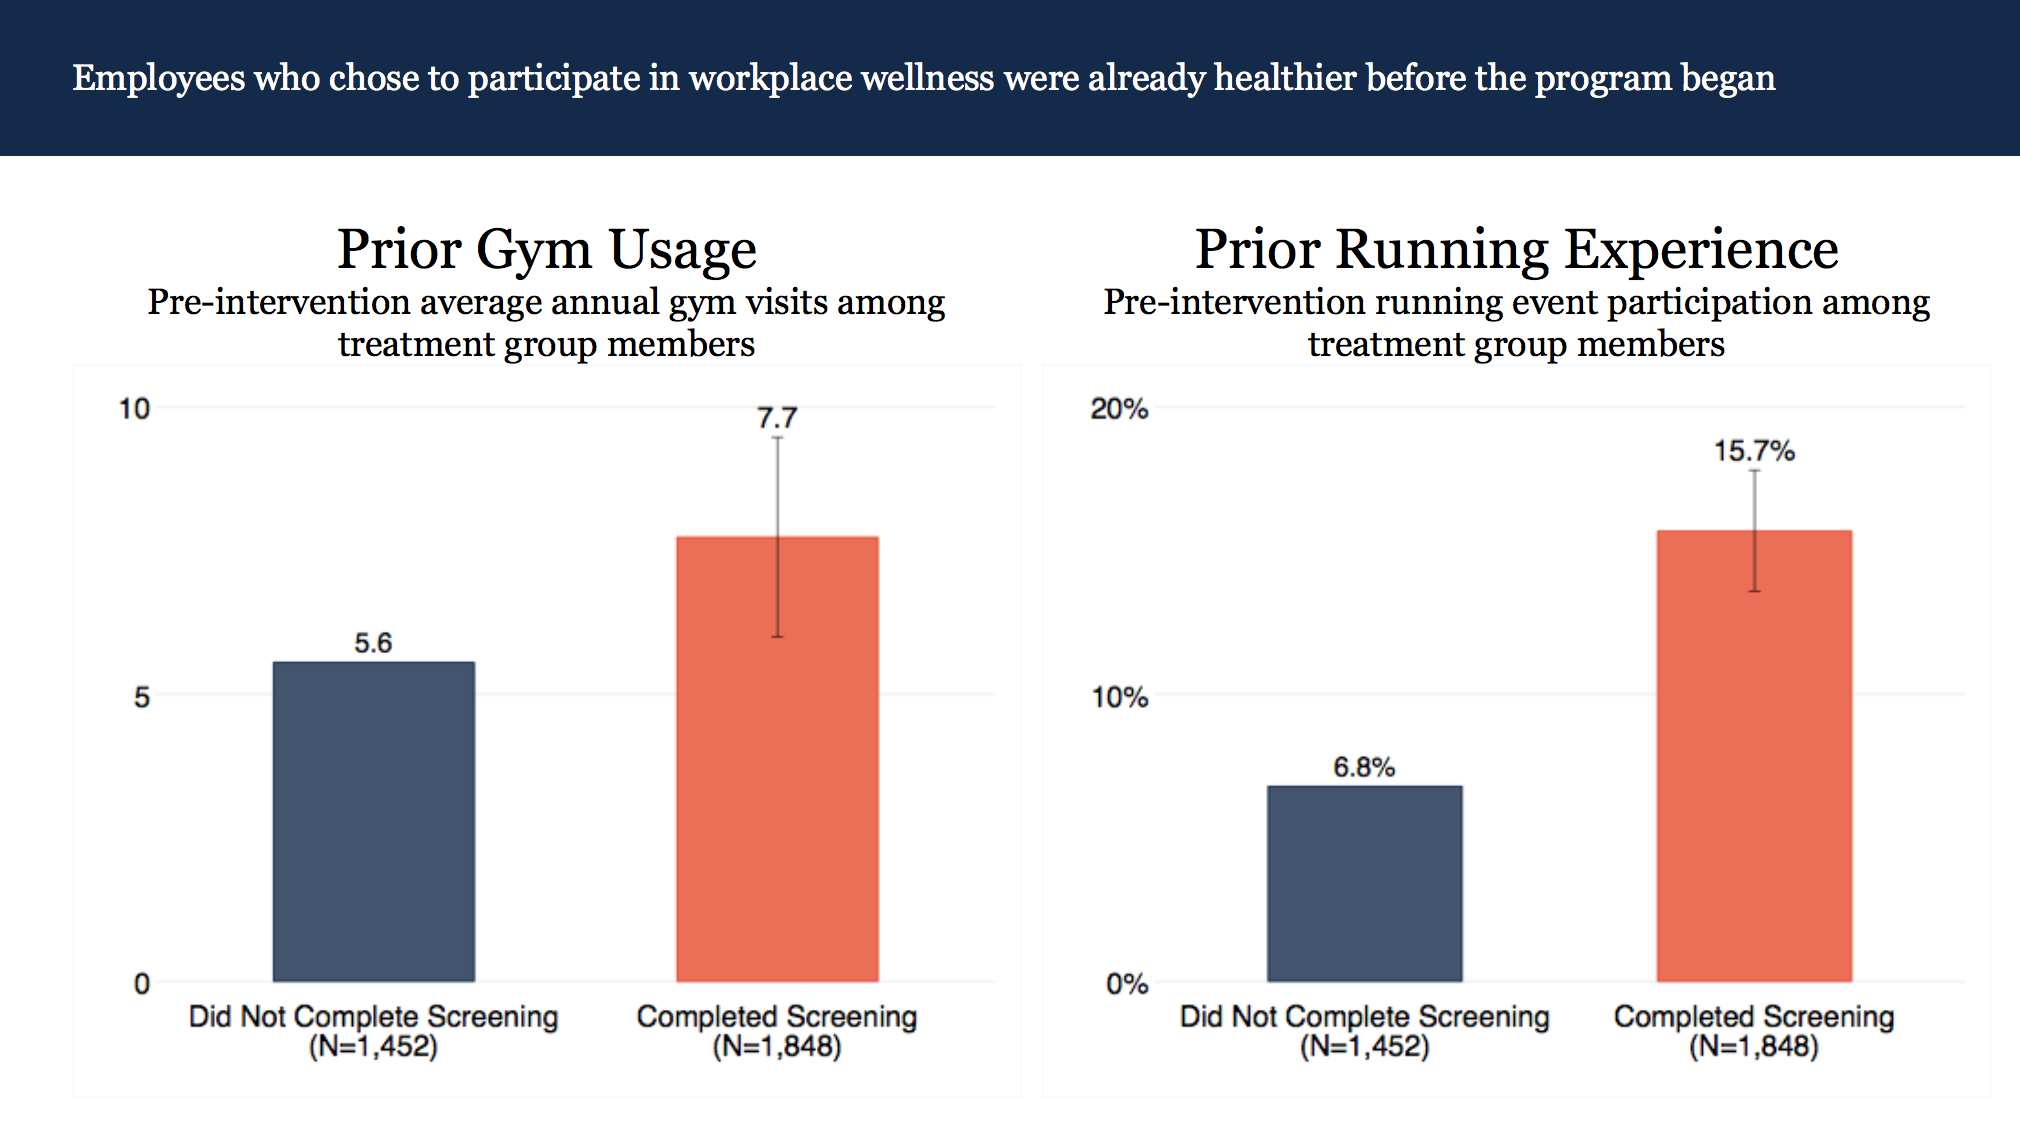 Employees who chose to participate in workplace wellness were already healthier before the program began